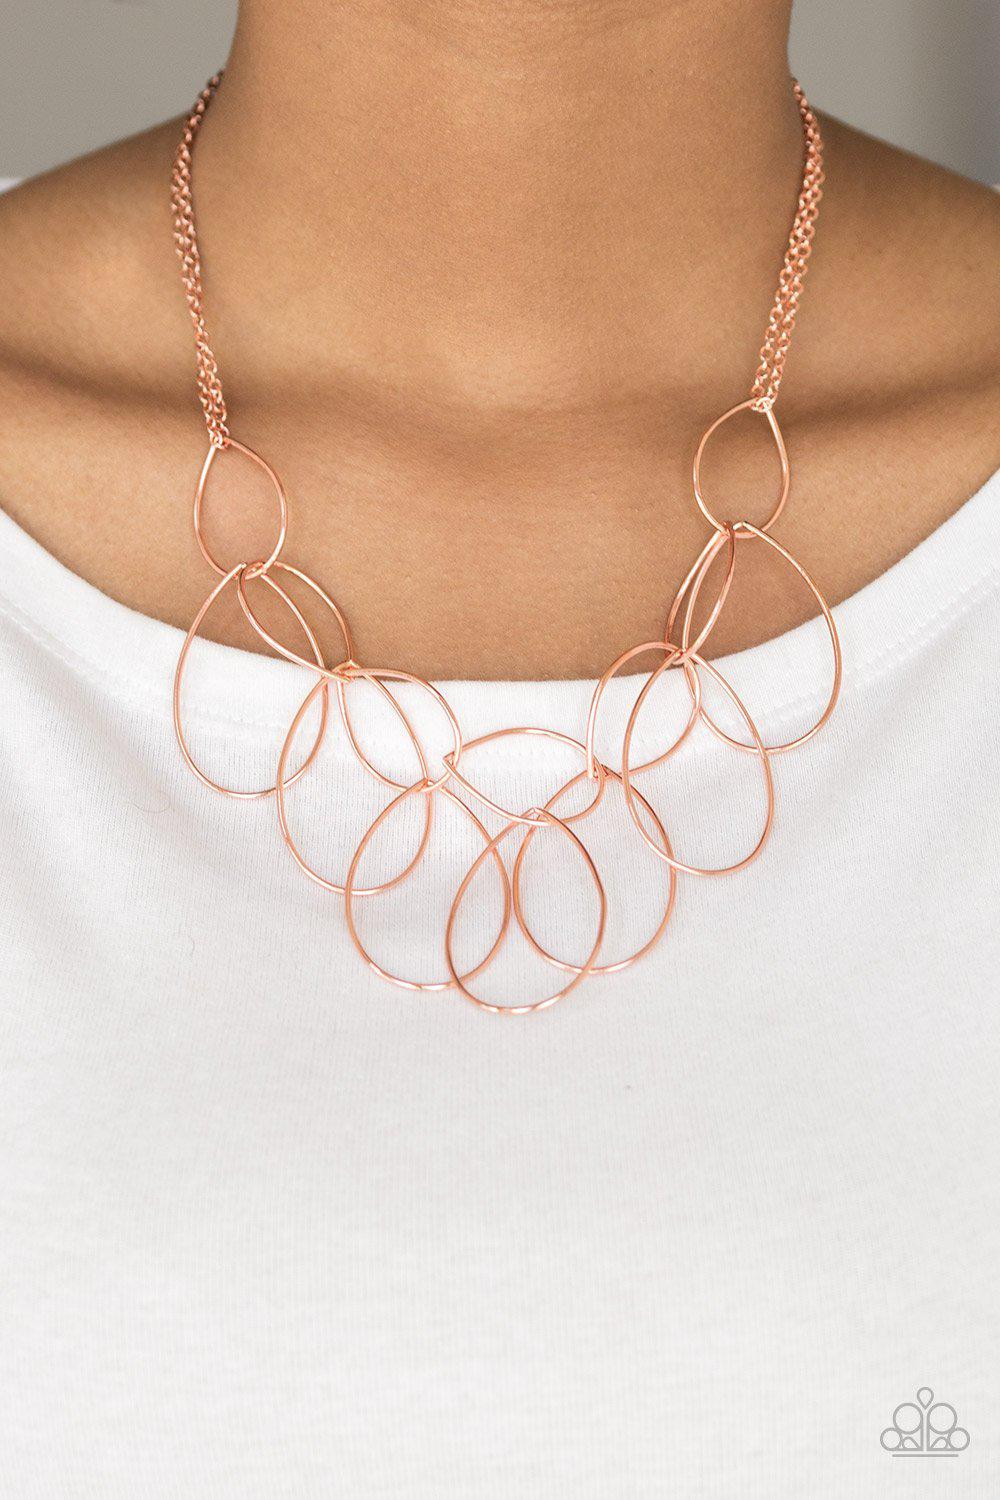 Top-TEAR Fashion Copper Teardrop Necklace - Paparazzi Accessories-CarasShop.com - $5 Jewelry by Cara Jewels